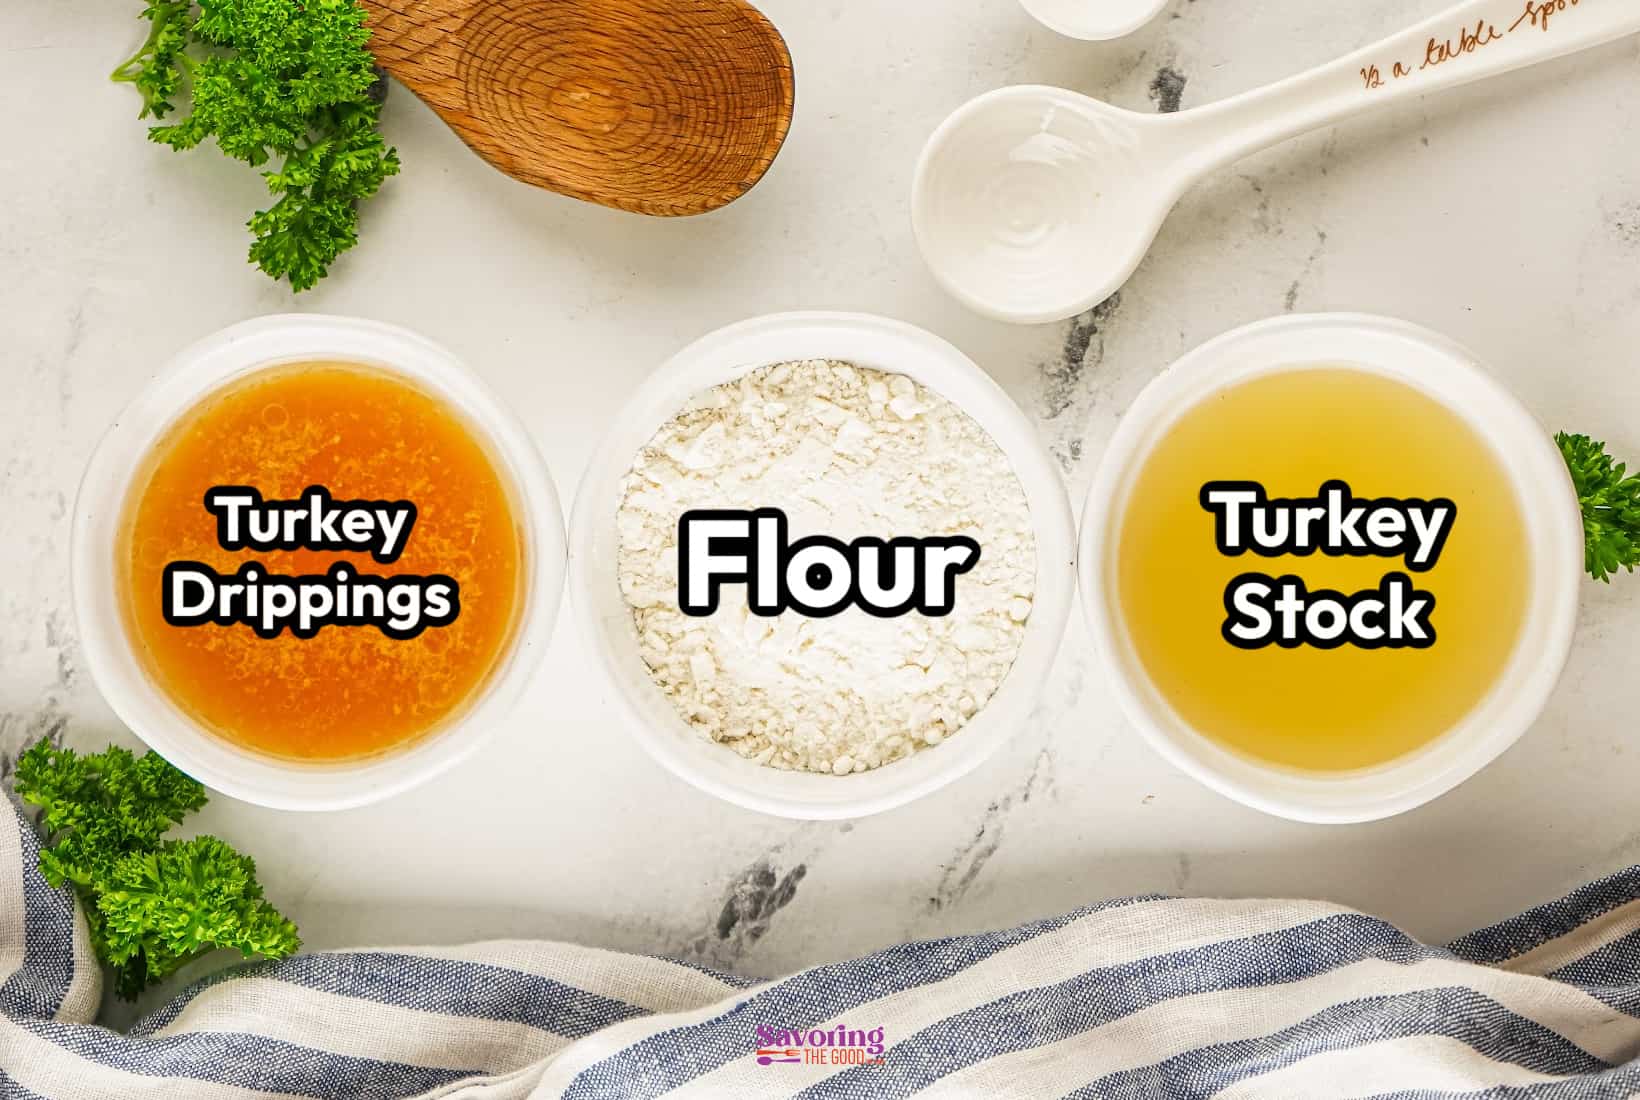 Turkey gravy made from drippings, flour, stock, and seasonings in bowls.